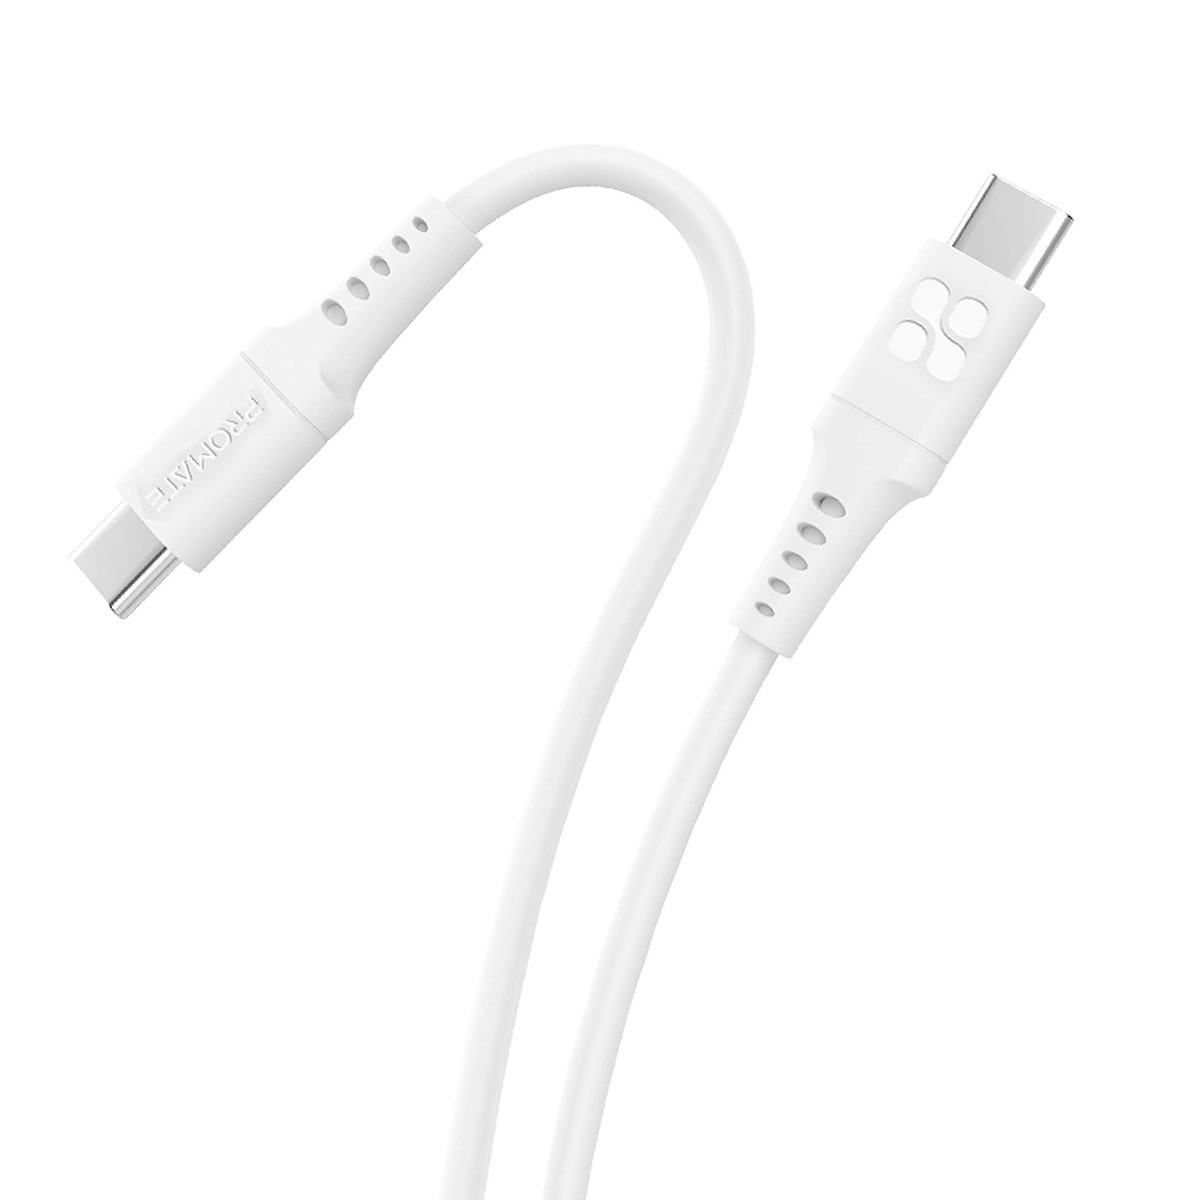 Promate USB-C Cable with 60W PD, 480Mbps Data Transfer and 200cm Silicone Cord, PowerLink-CC200 White